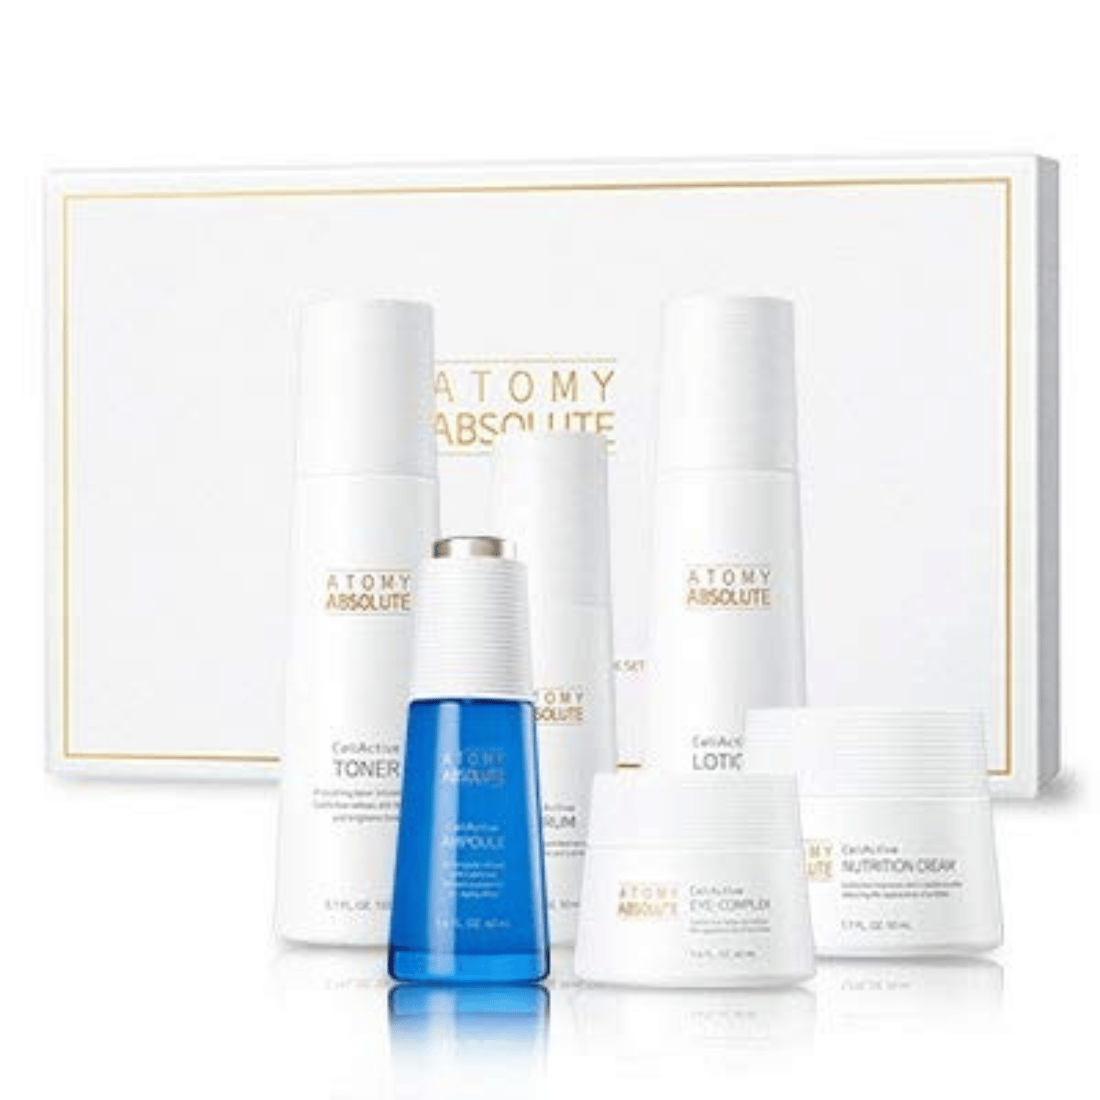 NEW Atomy Absolute Cell Active Skin care set